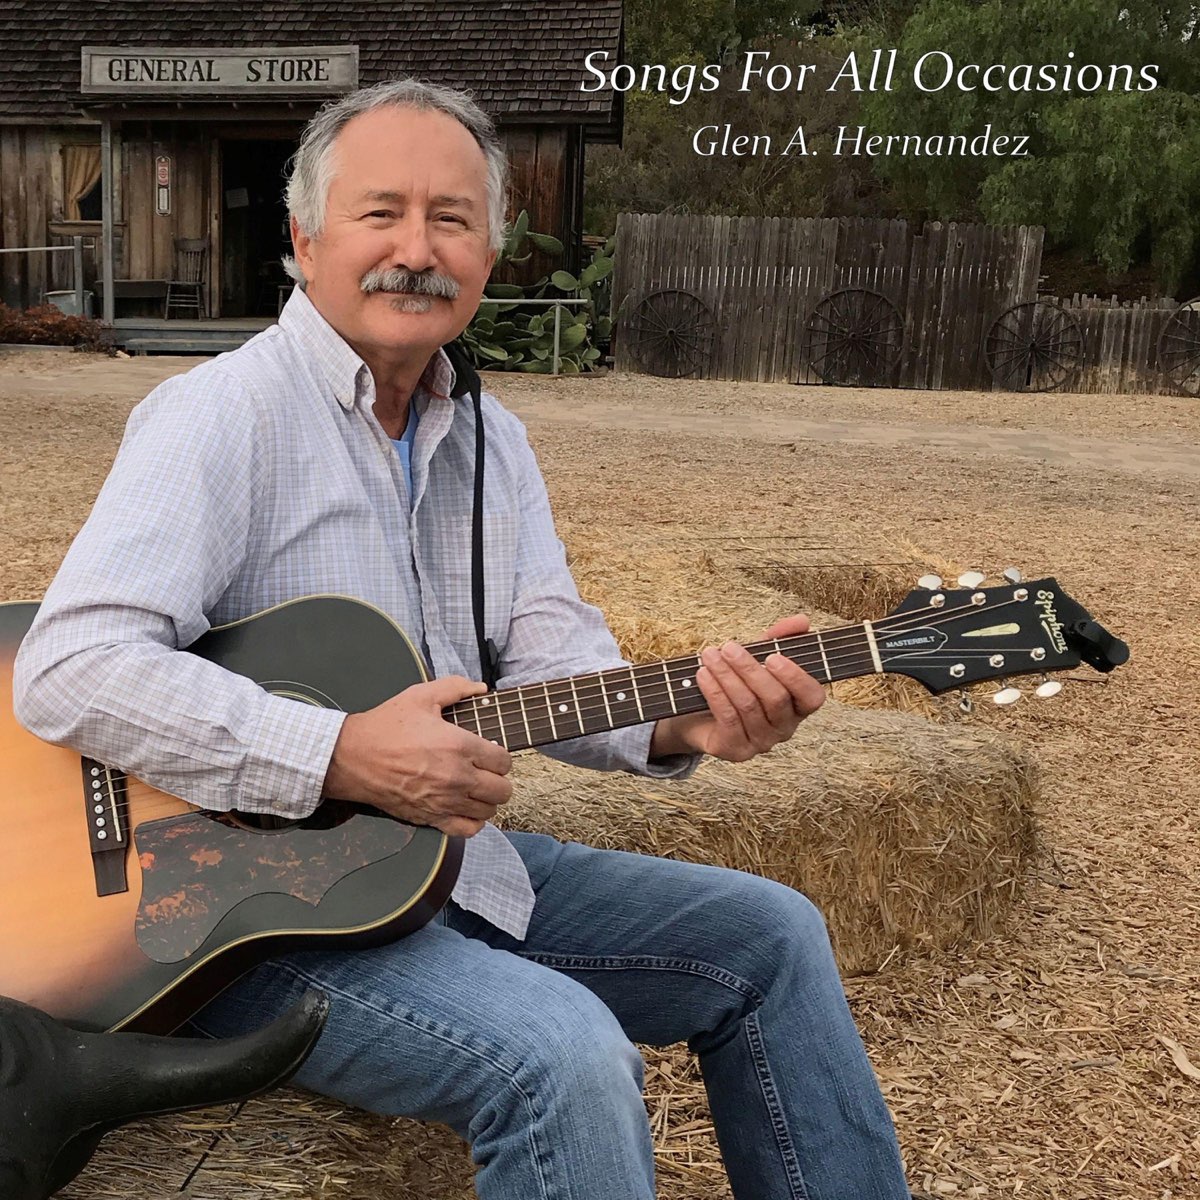 ‎Songs for All Occasions by Glen A. Hernandez on Apple Music